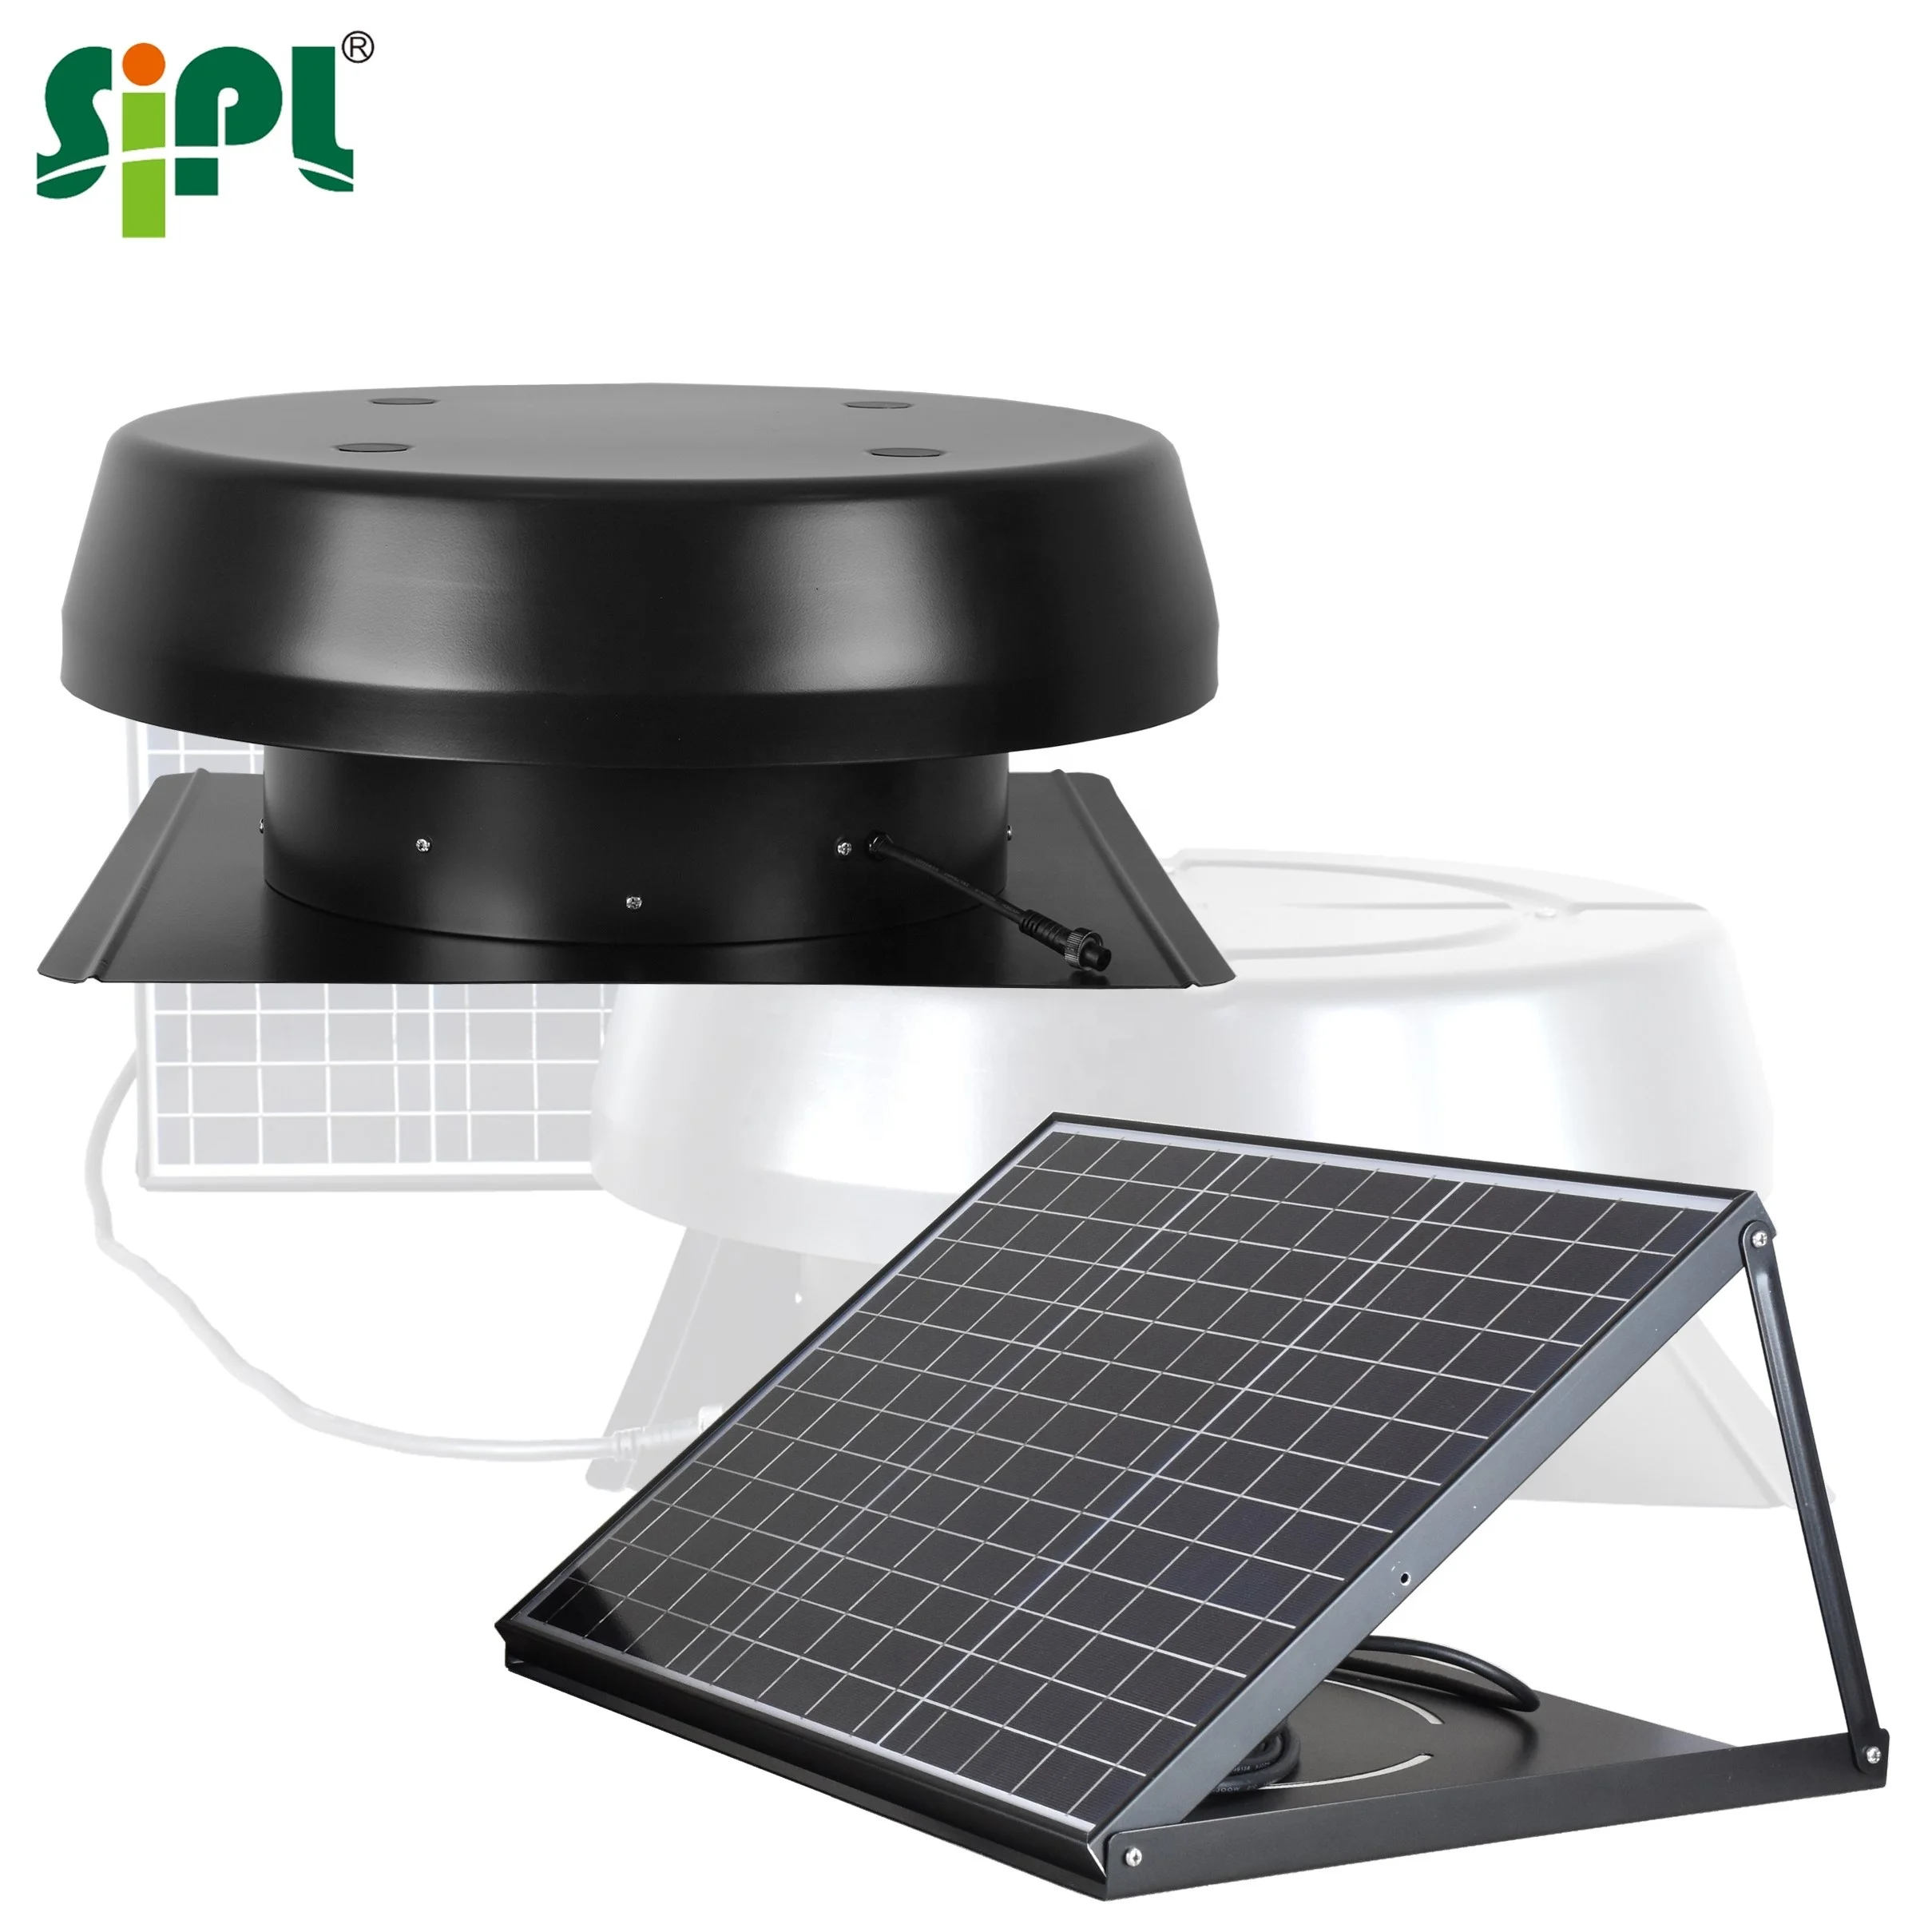 

No Power Attic Gable Heat Extractor 40W Eco Energy Solar Fan Roof Mounted DC Motor Duct Air Ventilation Ceiling Exhaust